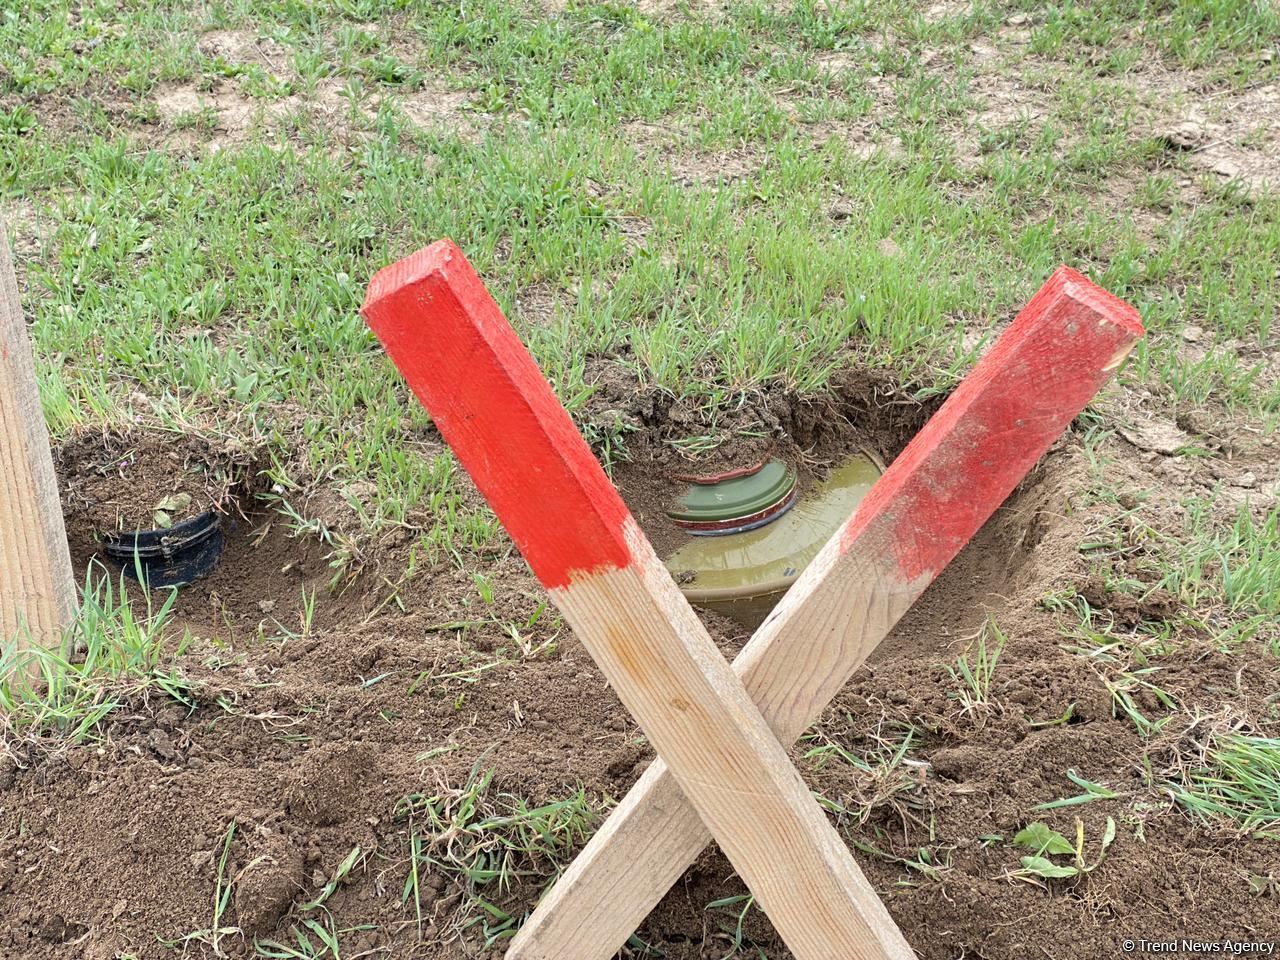 Azerbaijan publishes latest data on mine clearance work carried out in liberated lands